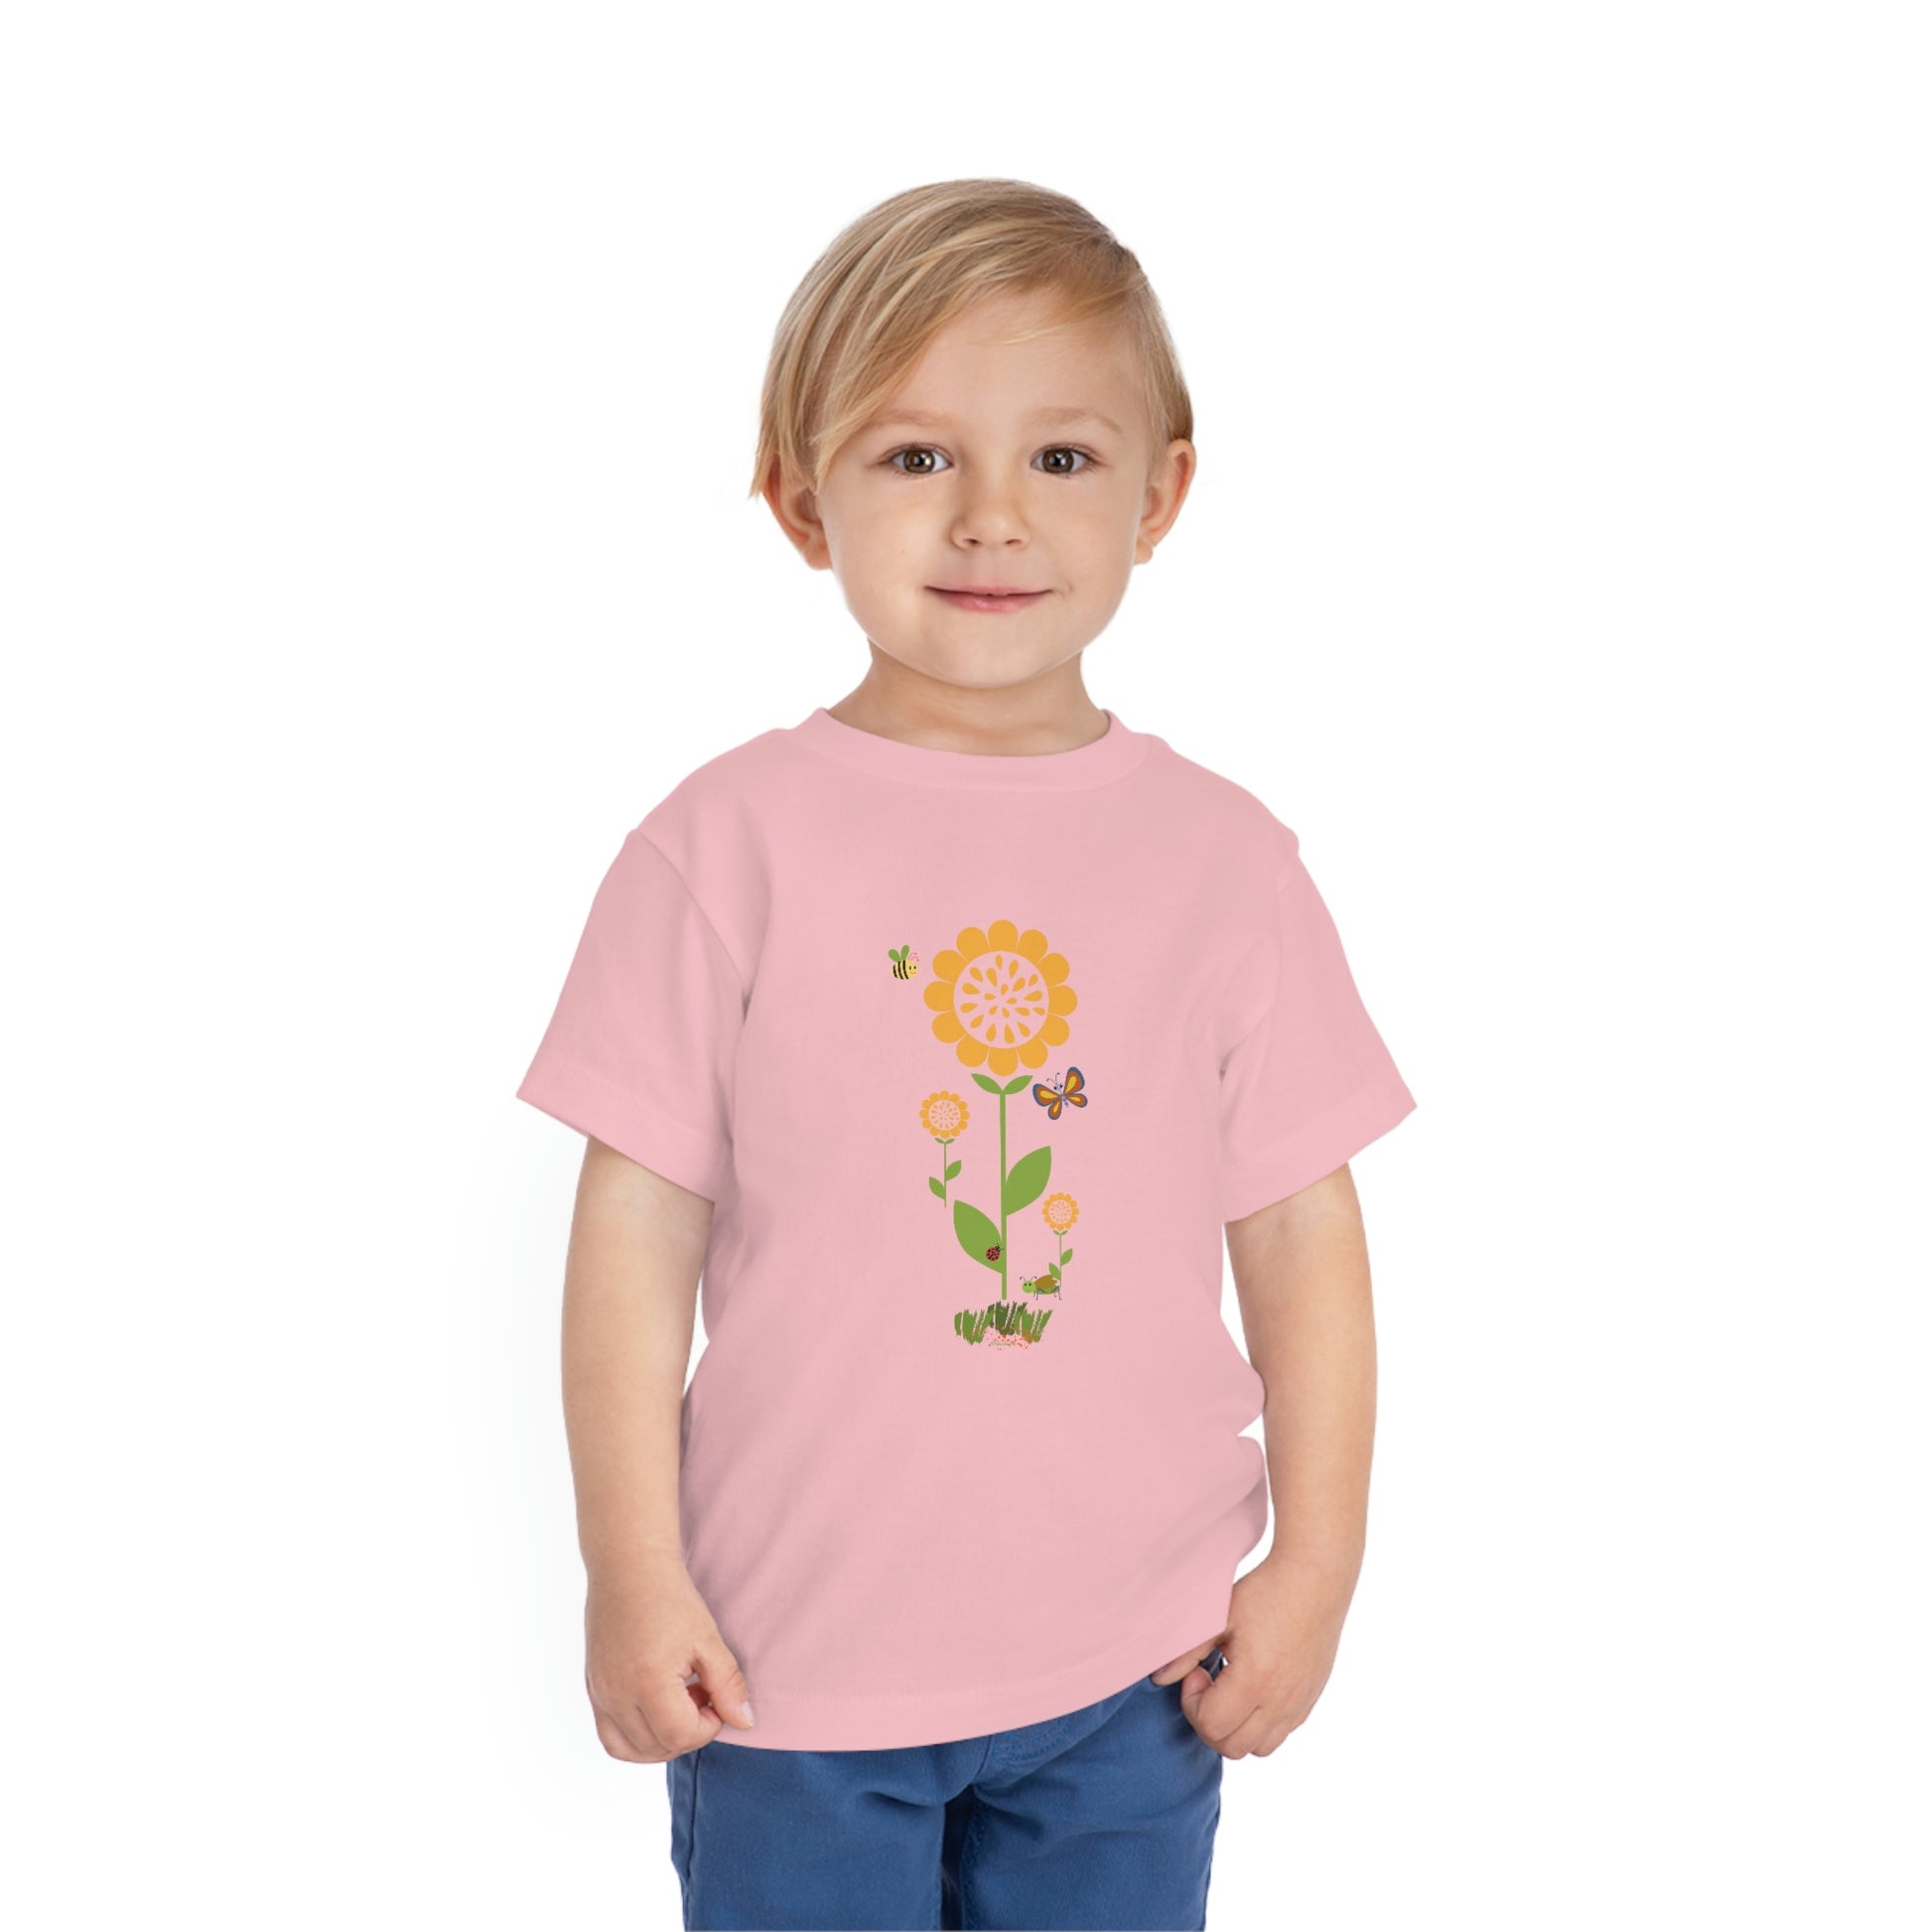 Mock up of child wearing our Pink T-shirt